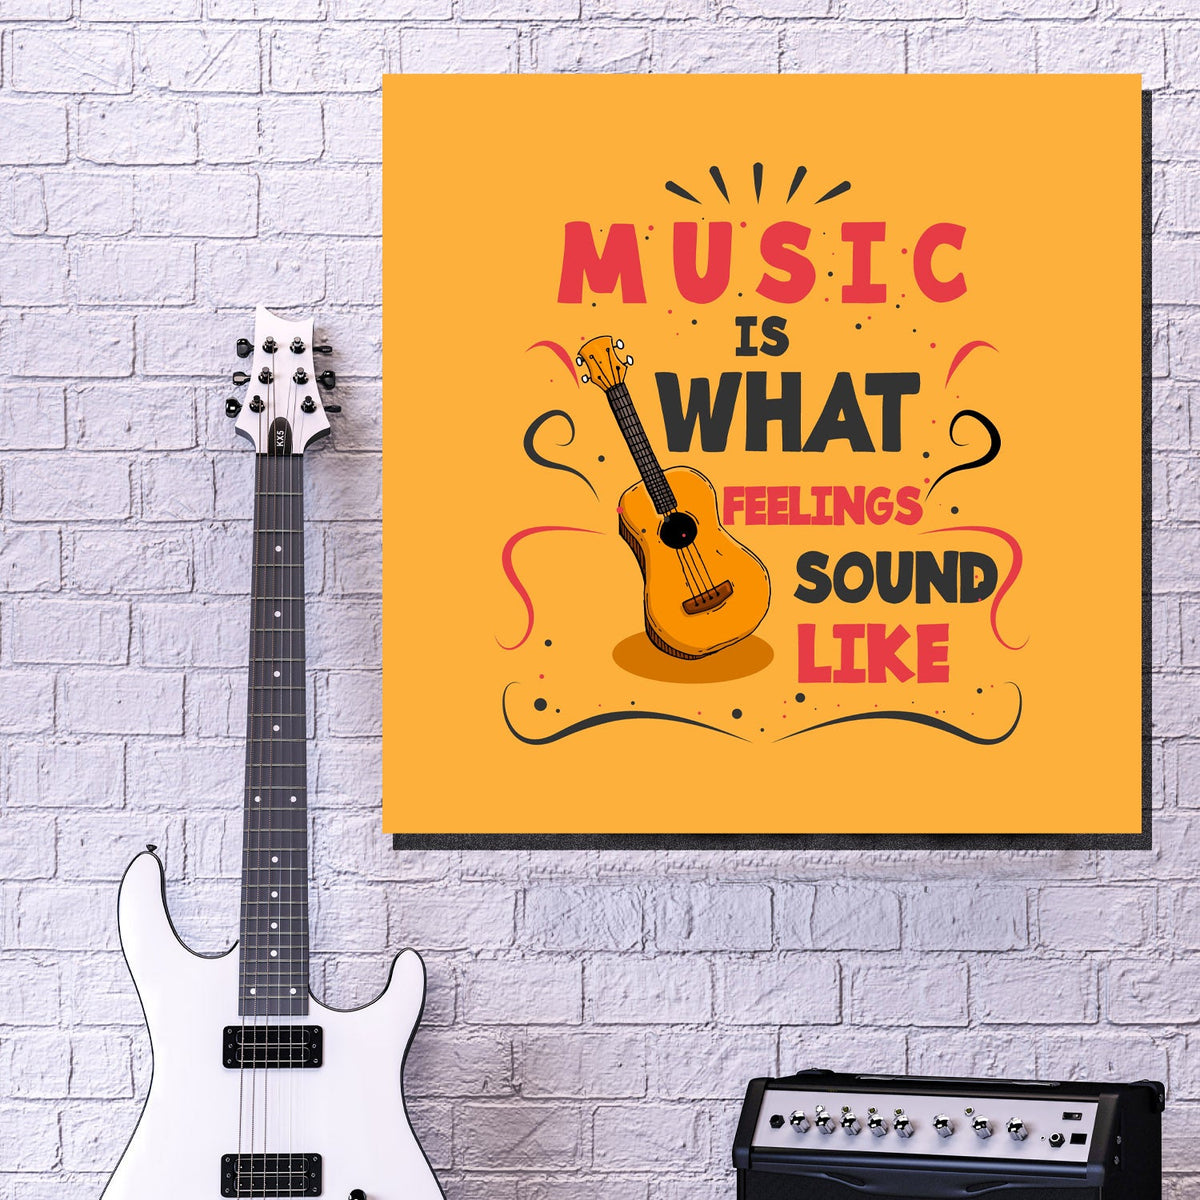 https://cdn.shopify.com/s/files/1/0387/9986/8044/products/MusicCanvasArtprintStretched-1.jpg